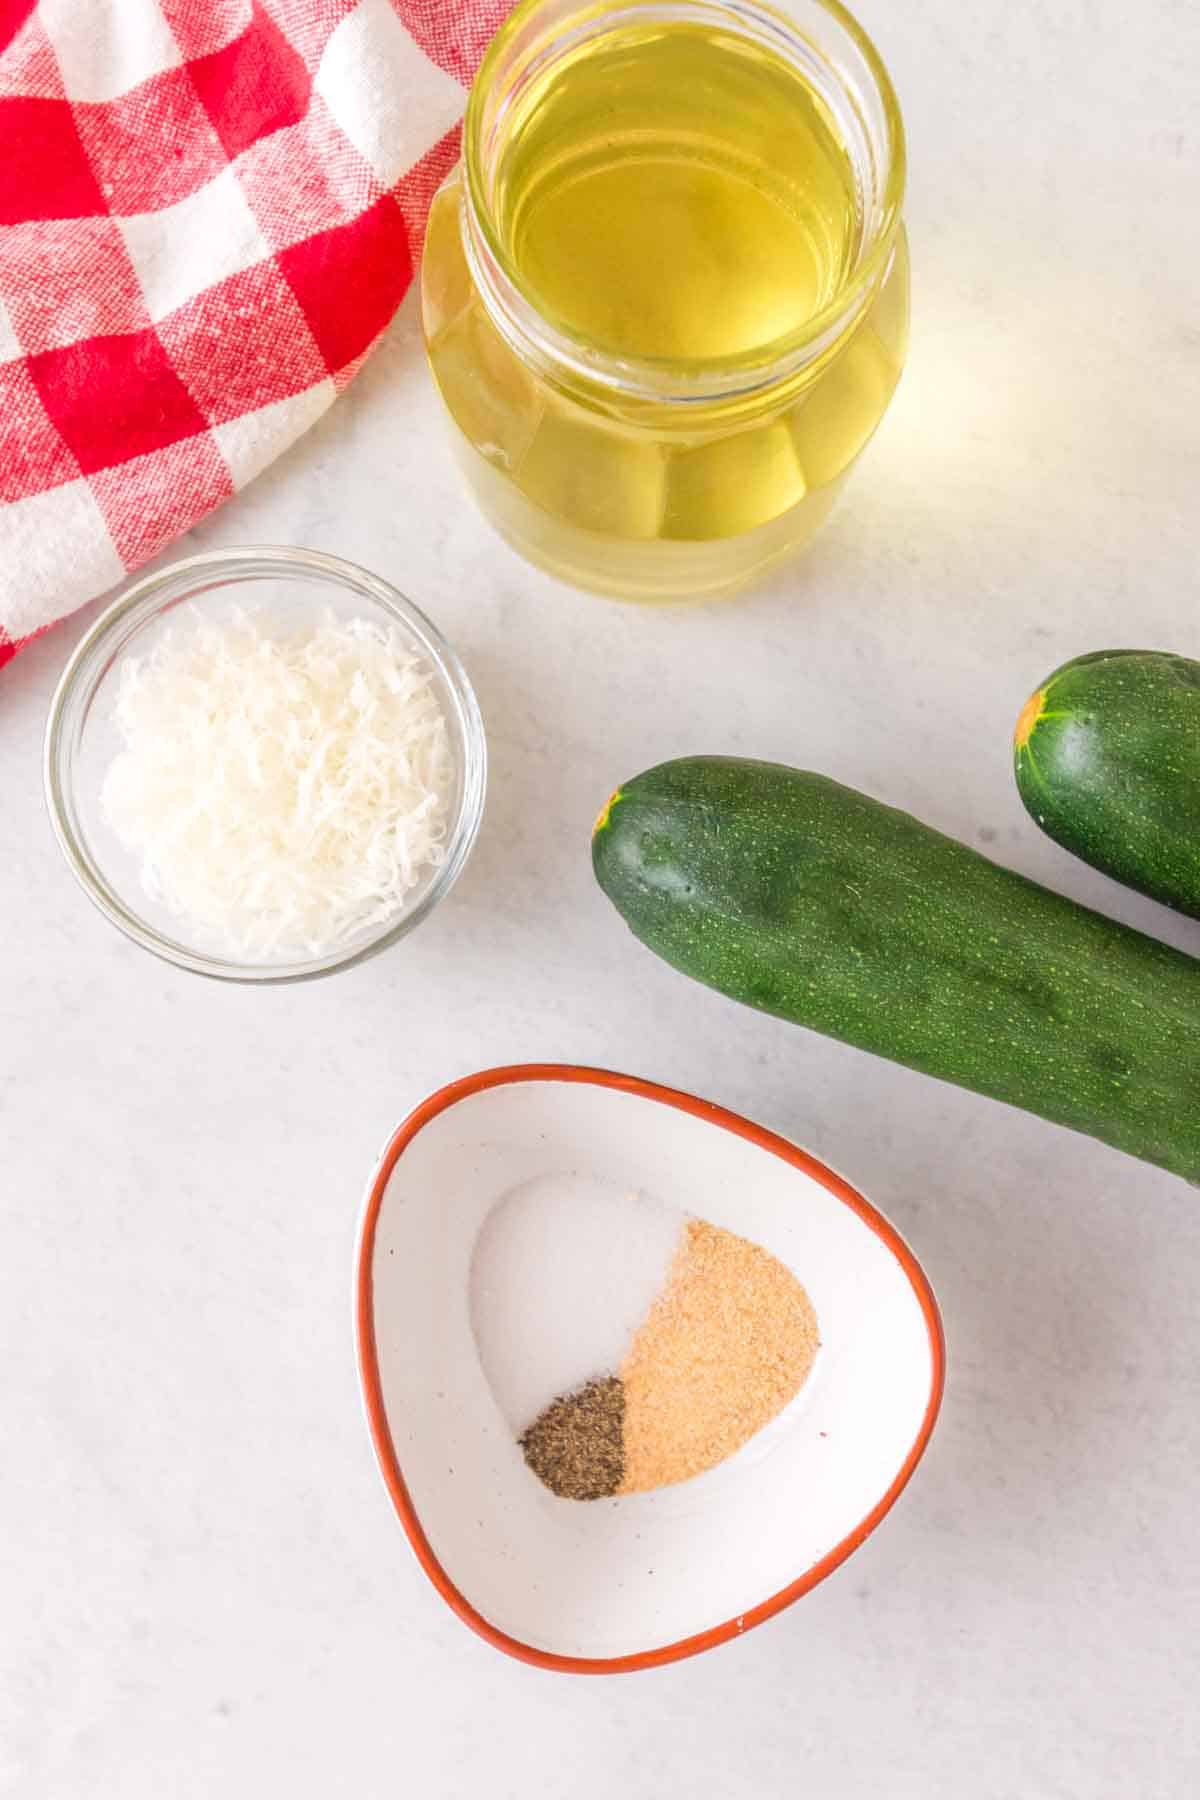 zucchini noodle ingredients